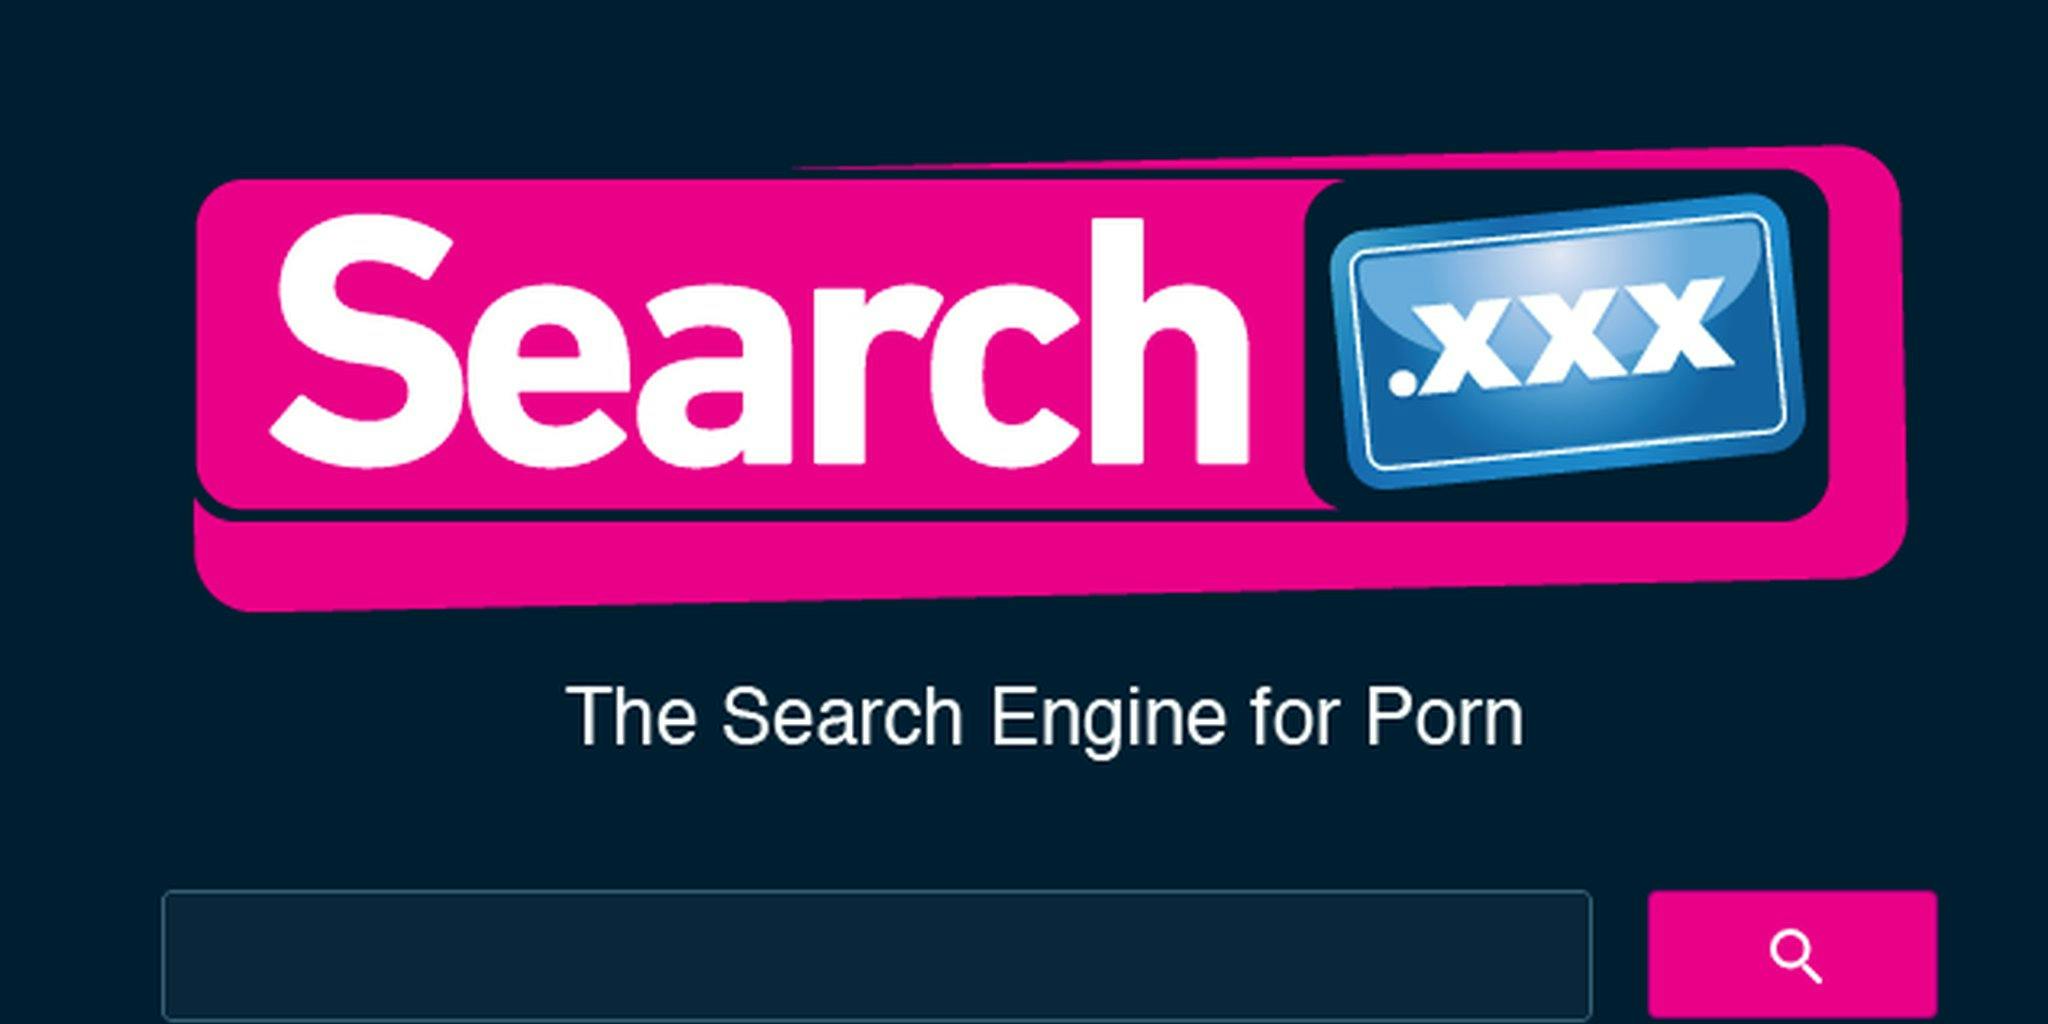 Search.xxx wants to be the Google of porn - Cashmere